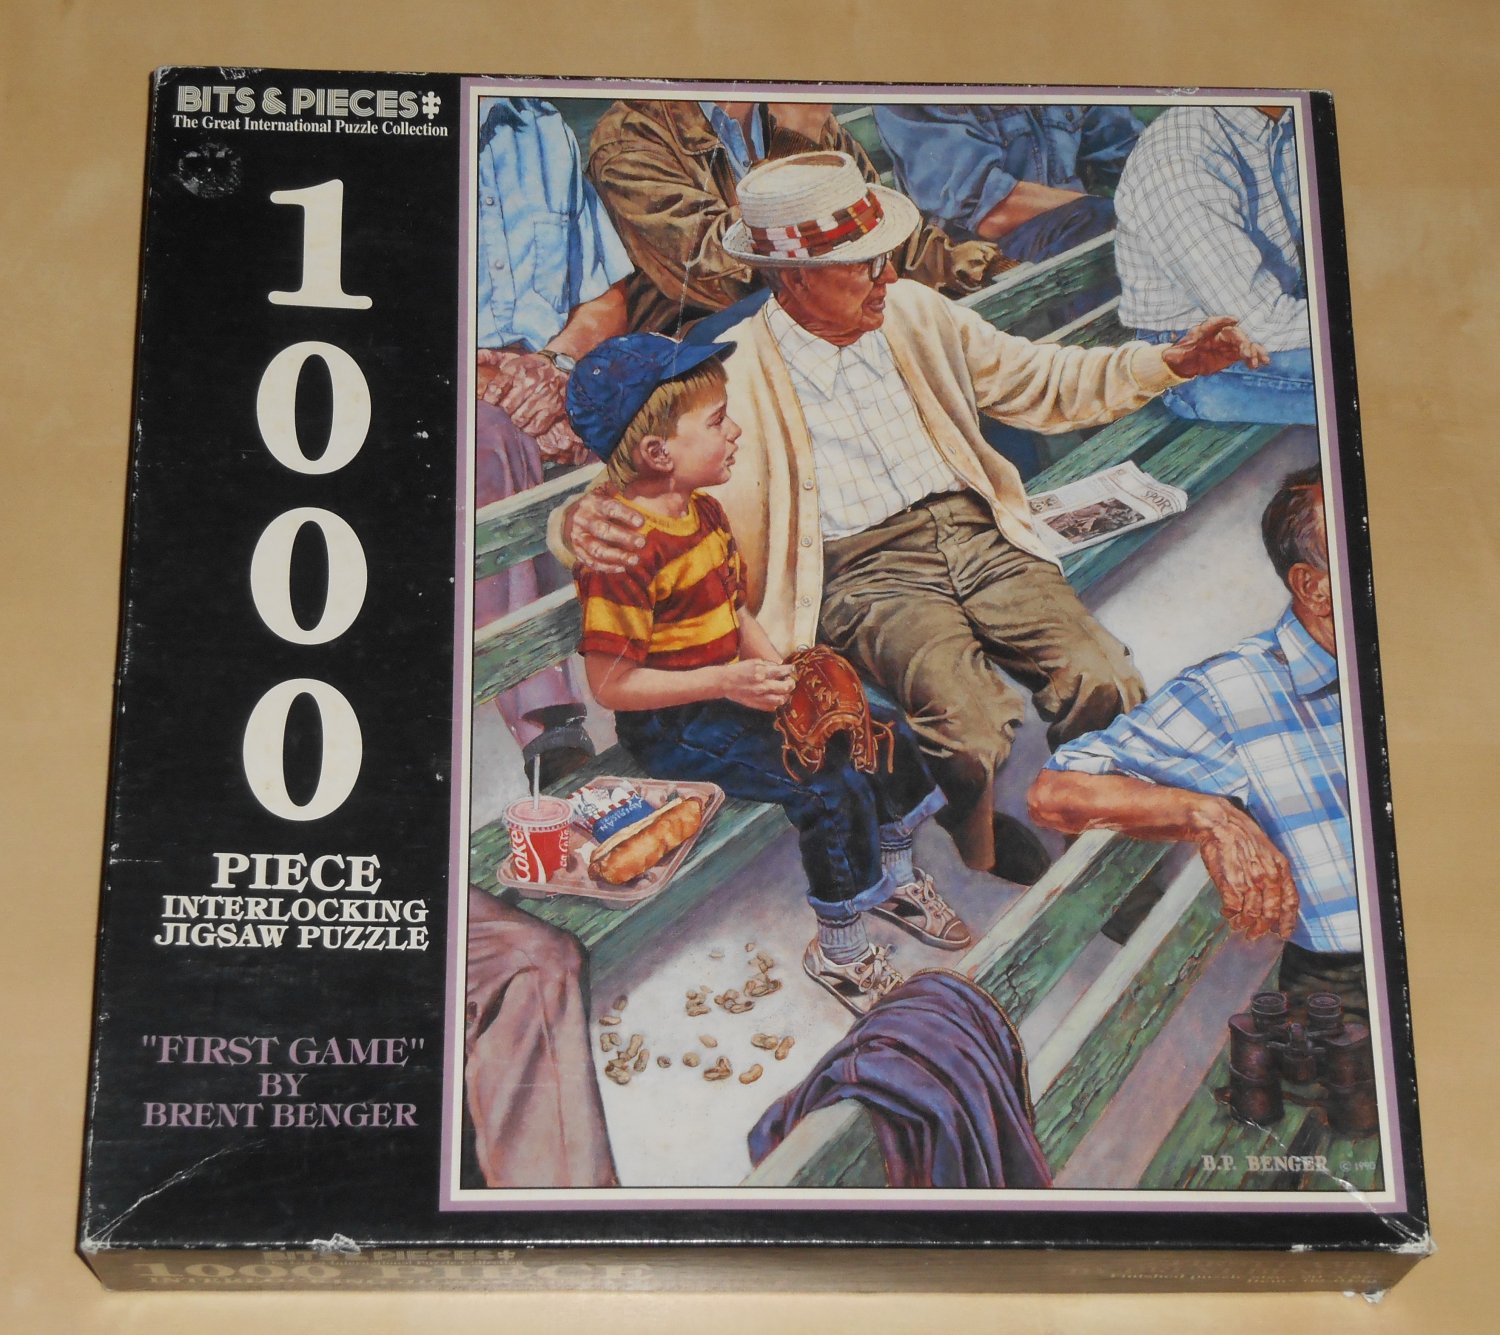 First Game 1000 Piece Jigsaw Puzzle 02-0432 Baseball Brent Benger Bits and Pieces COMPLETE